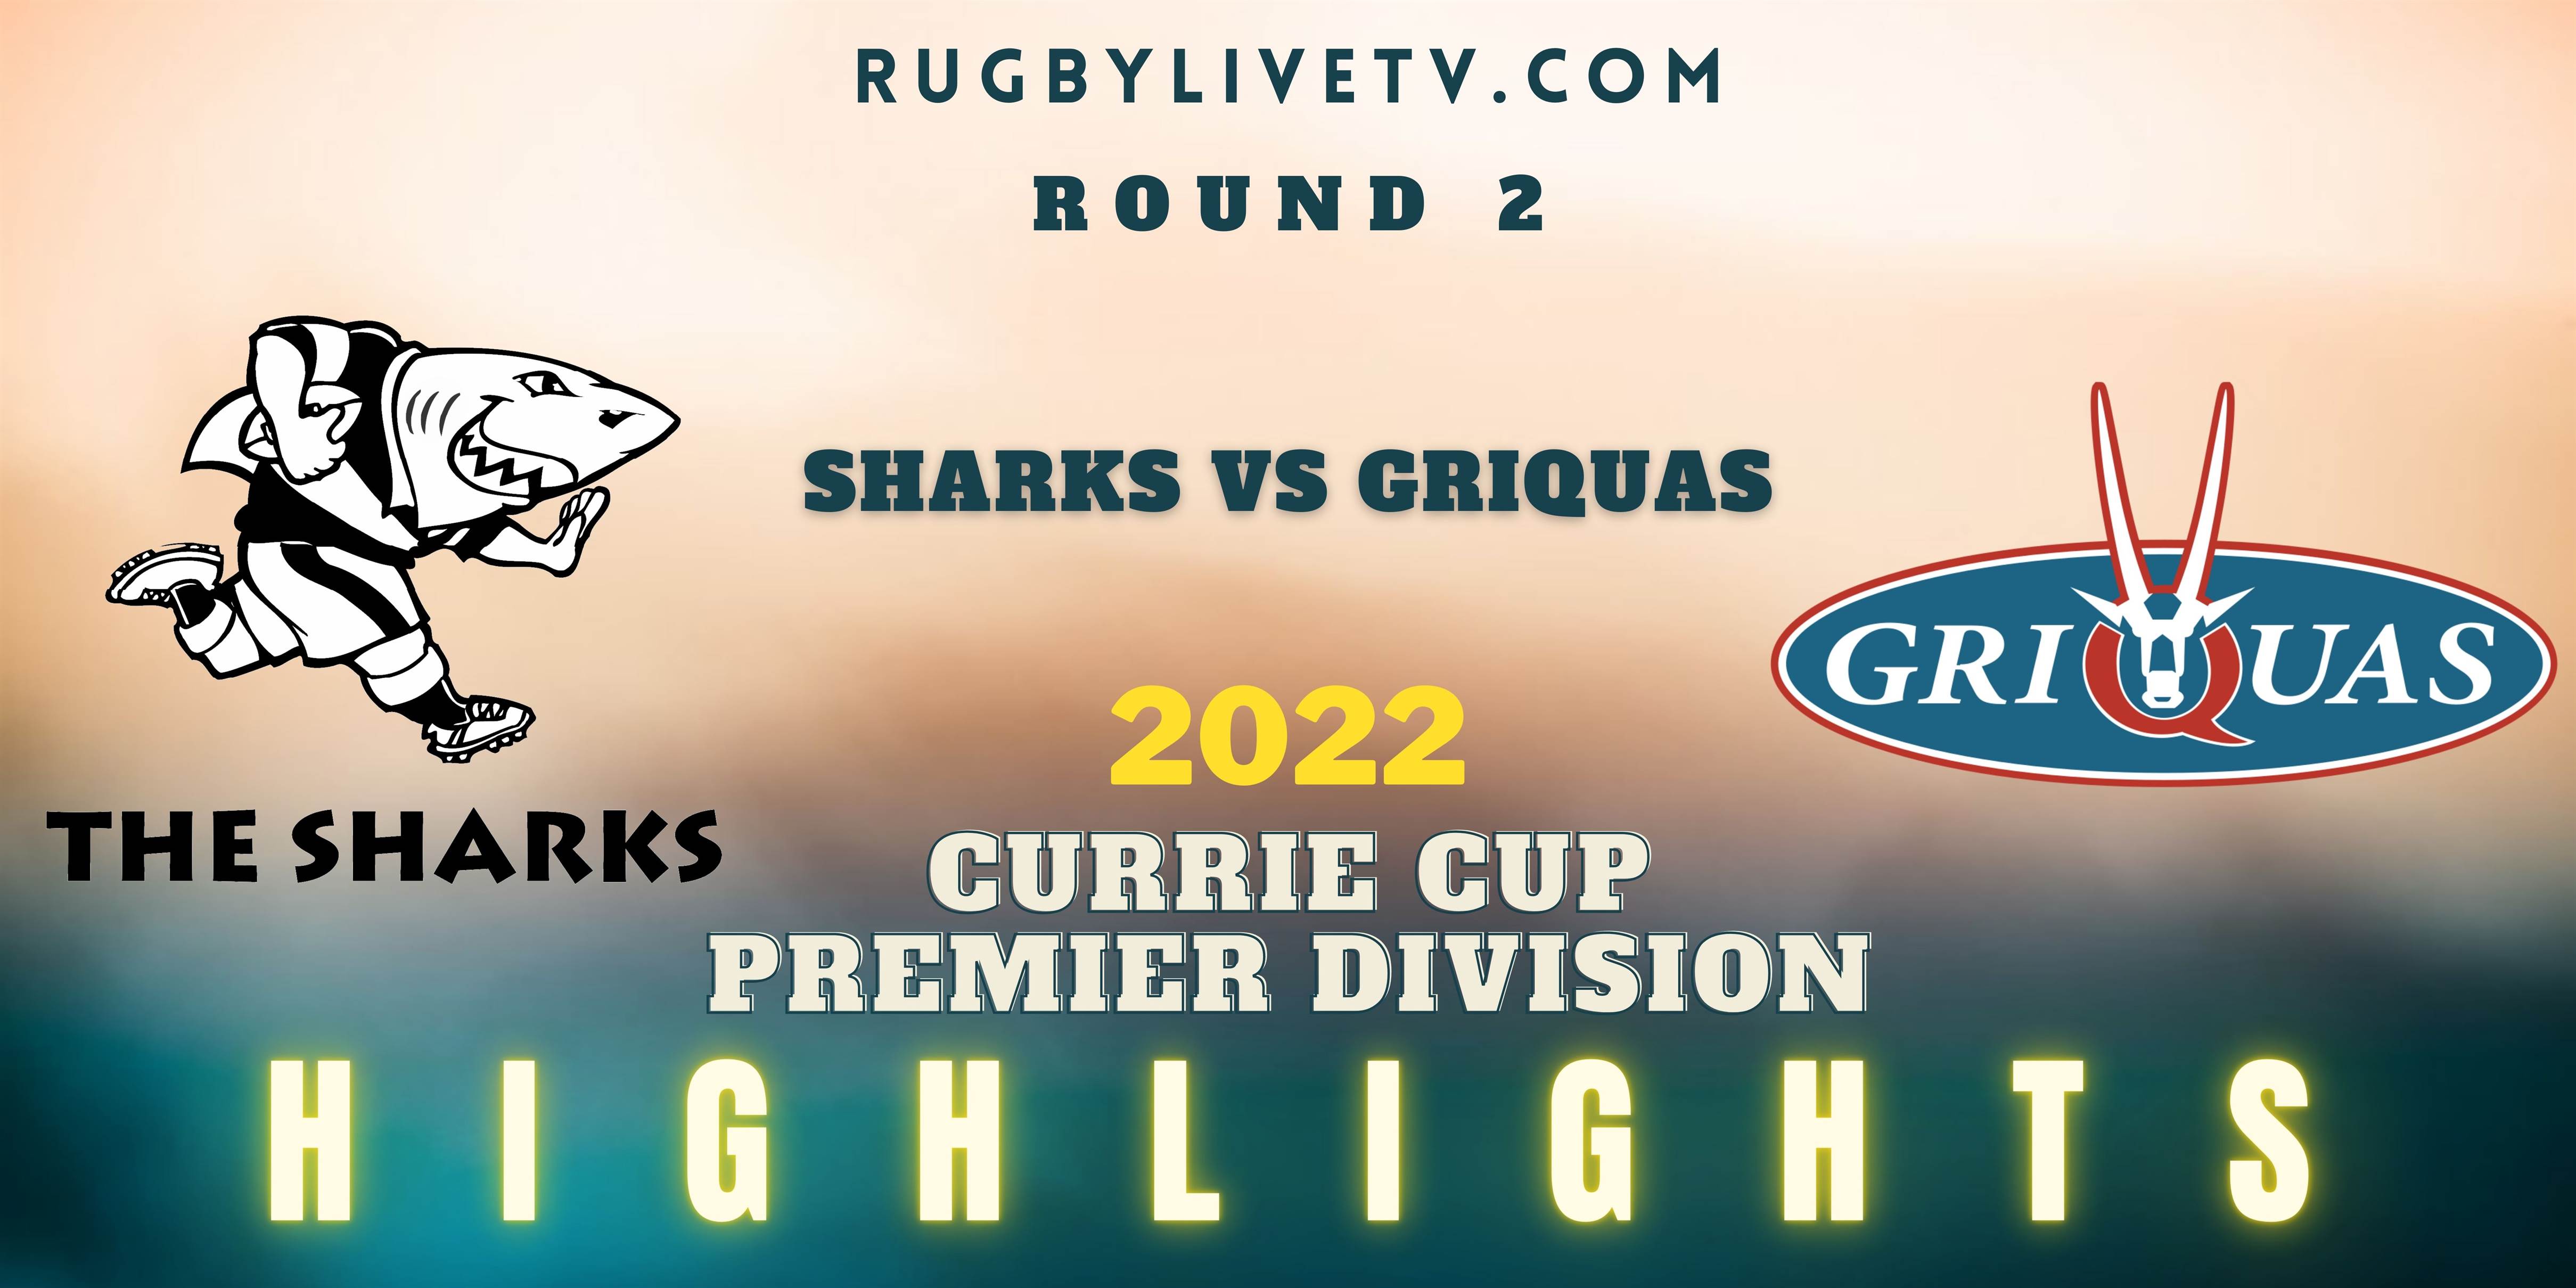 Sharks Vs Griquas Currie Cup Highlights 2022 Rd 2